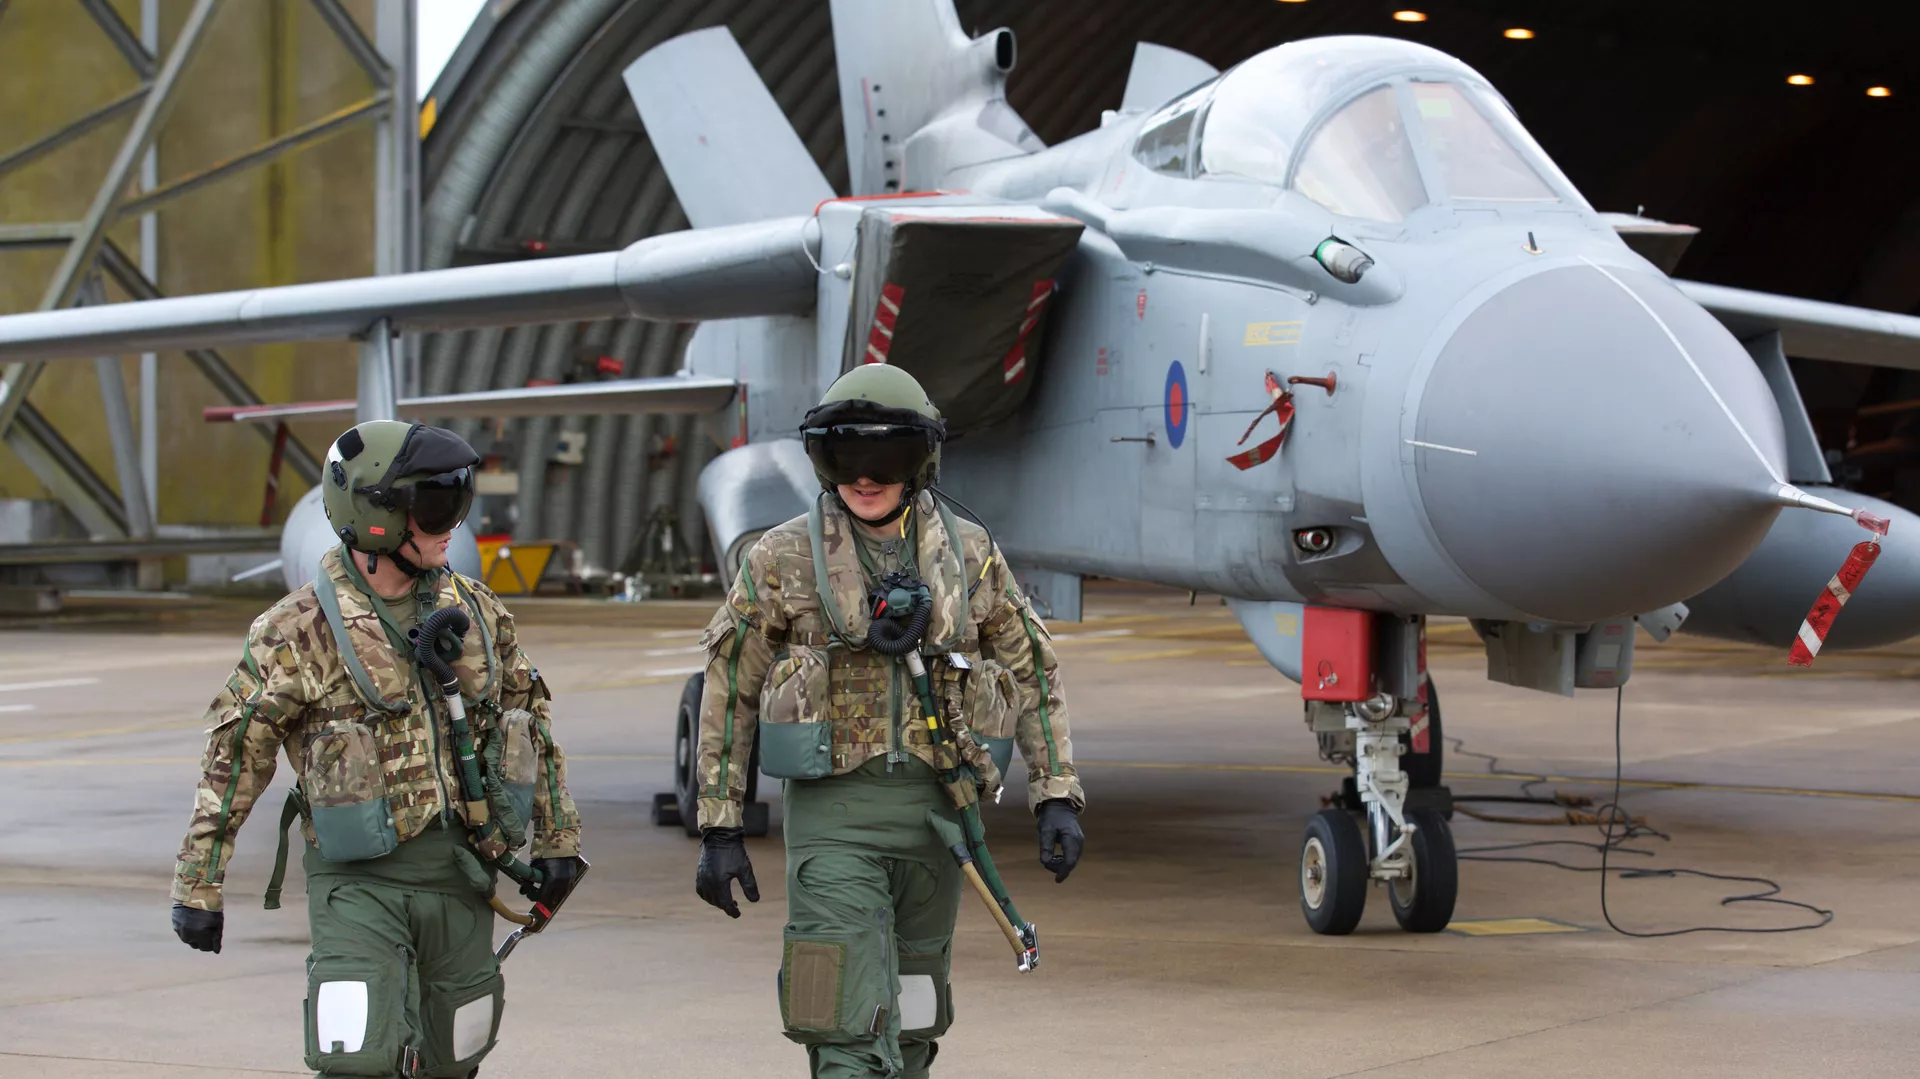 Former UK Military Pilots Reportedly Being ‘Headhunted’ by Chinese Military